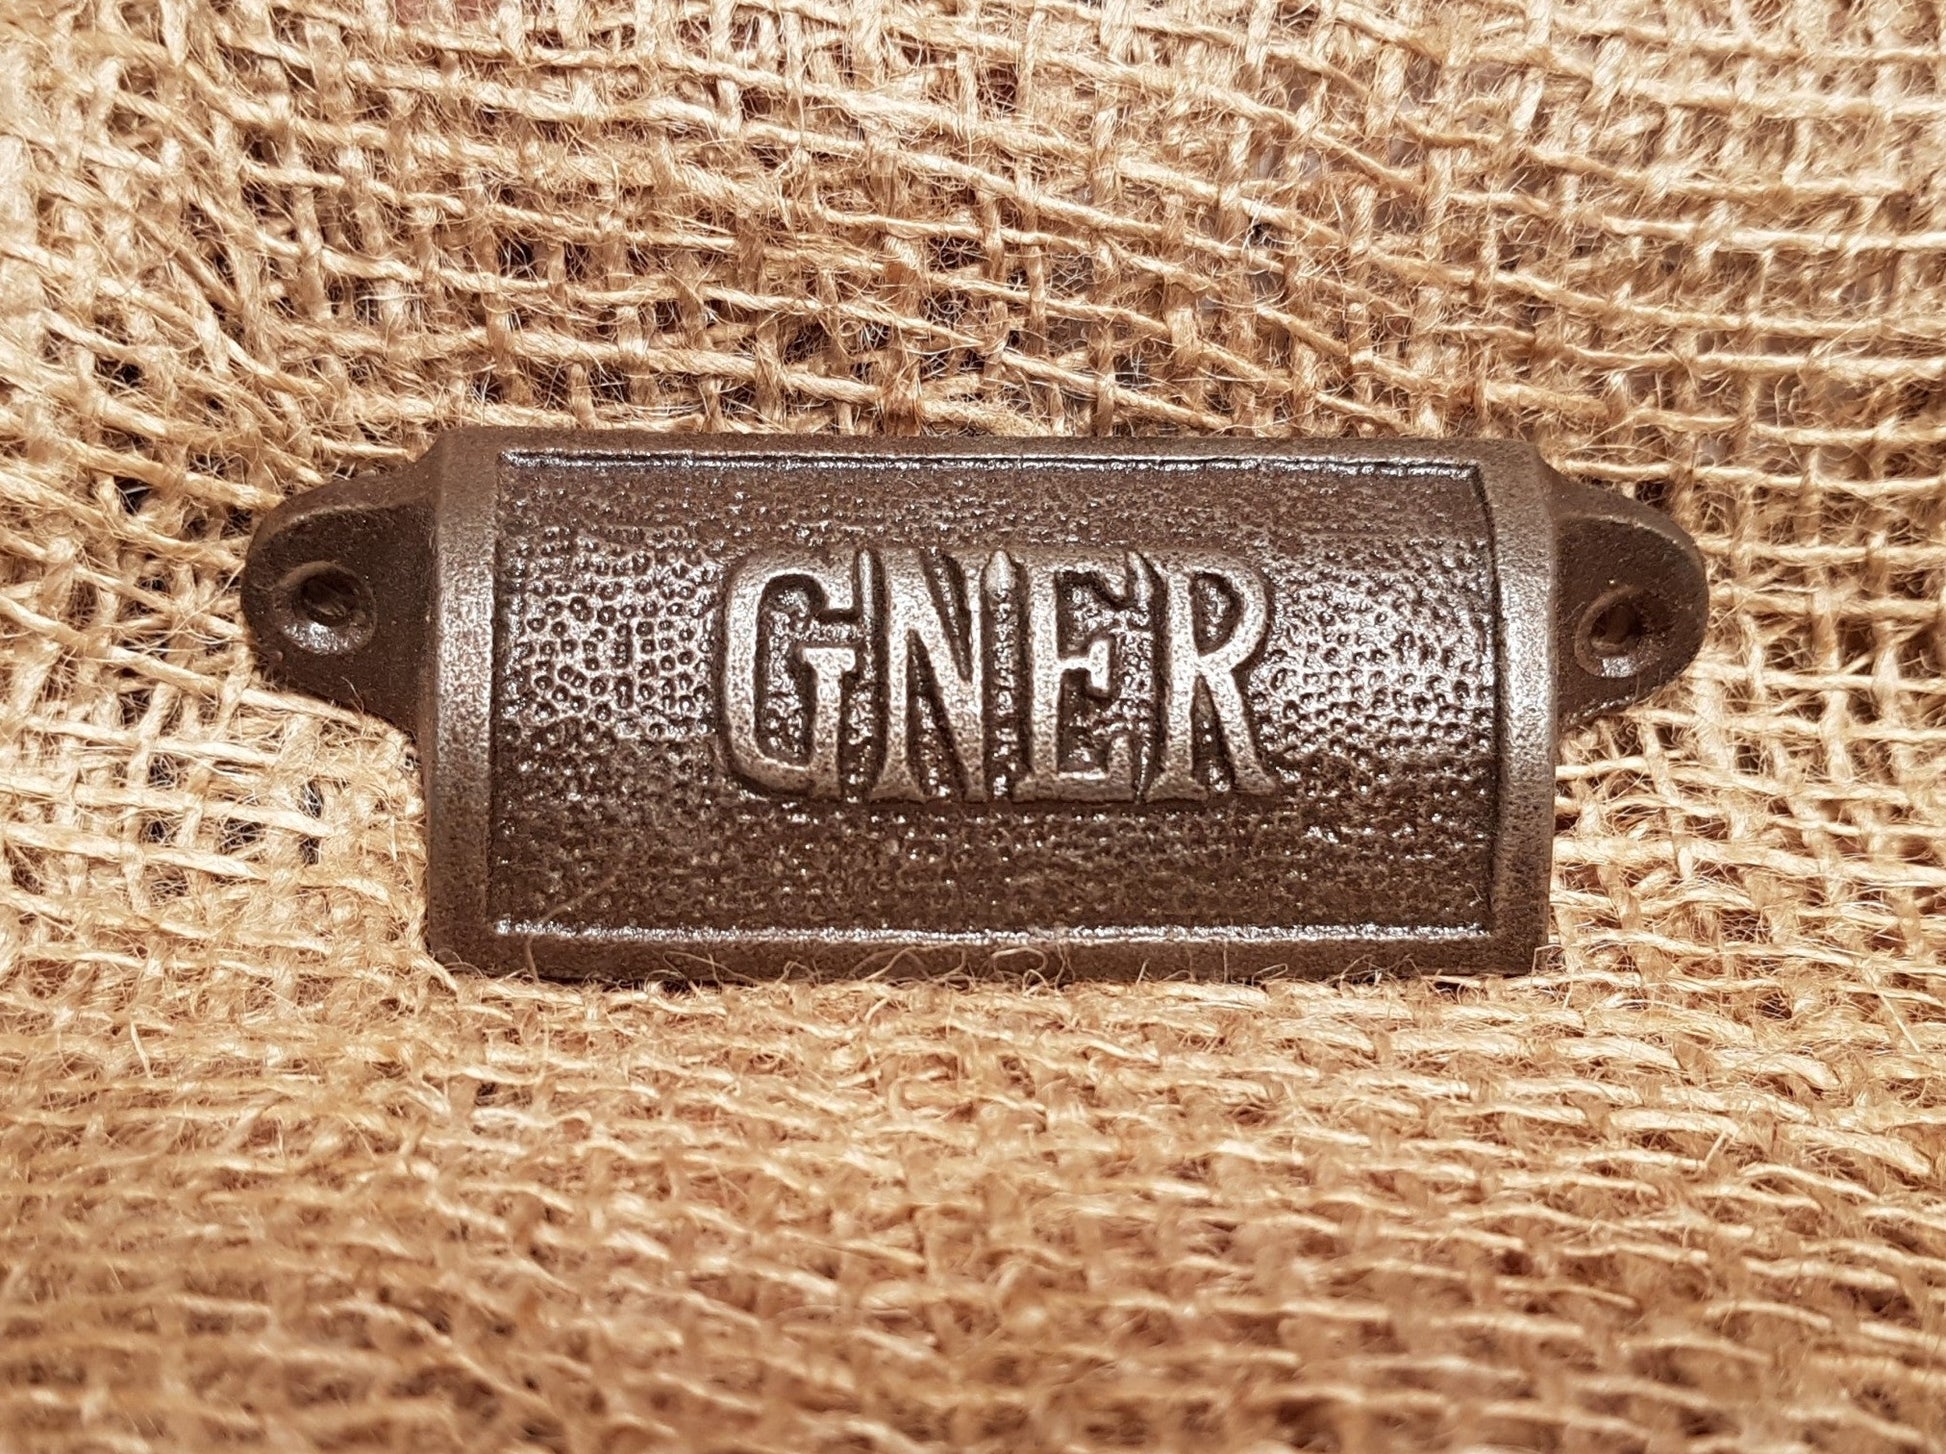 G.N.E.R. Cup Pull Handle - Spearhead Collection - Cup Pull Handles - Drawer Hardware, Made in England, Pull Handles, Railway